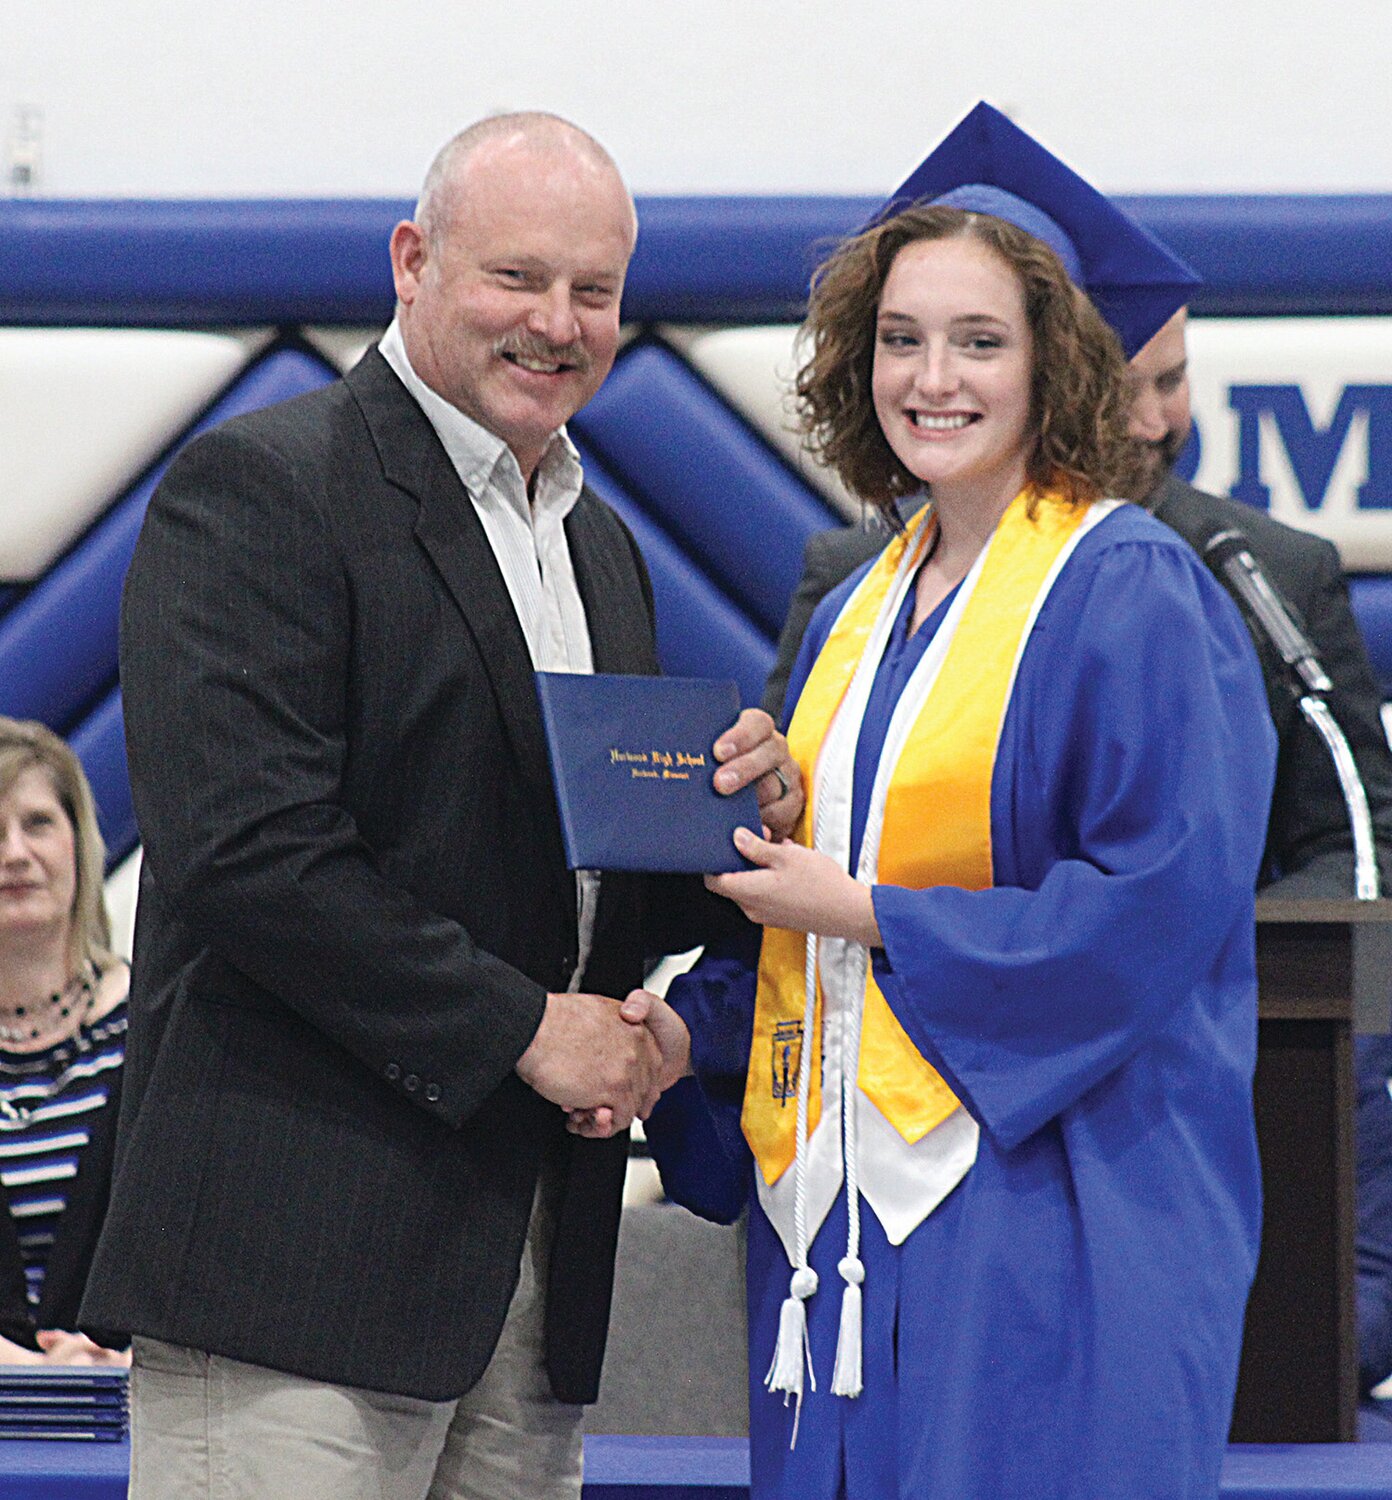 Norwood graduate Annie Sullivan receives her diploma from her father and school board member, Chad Sullivan.